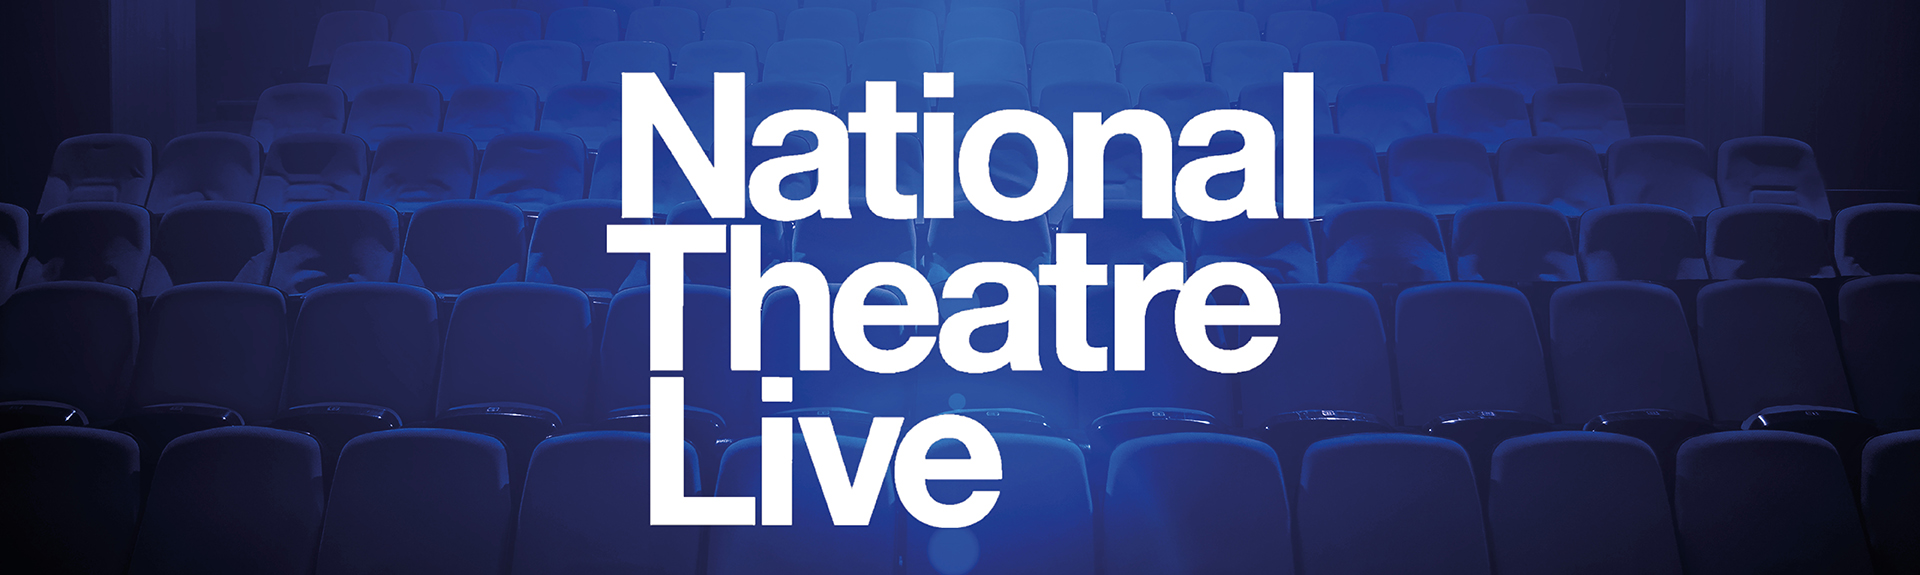 National Theatre Live Embassy Theatre